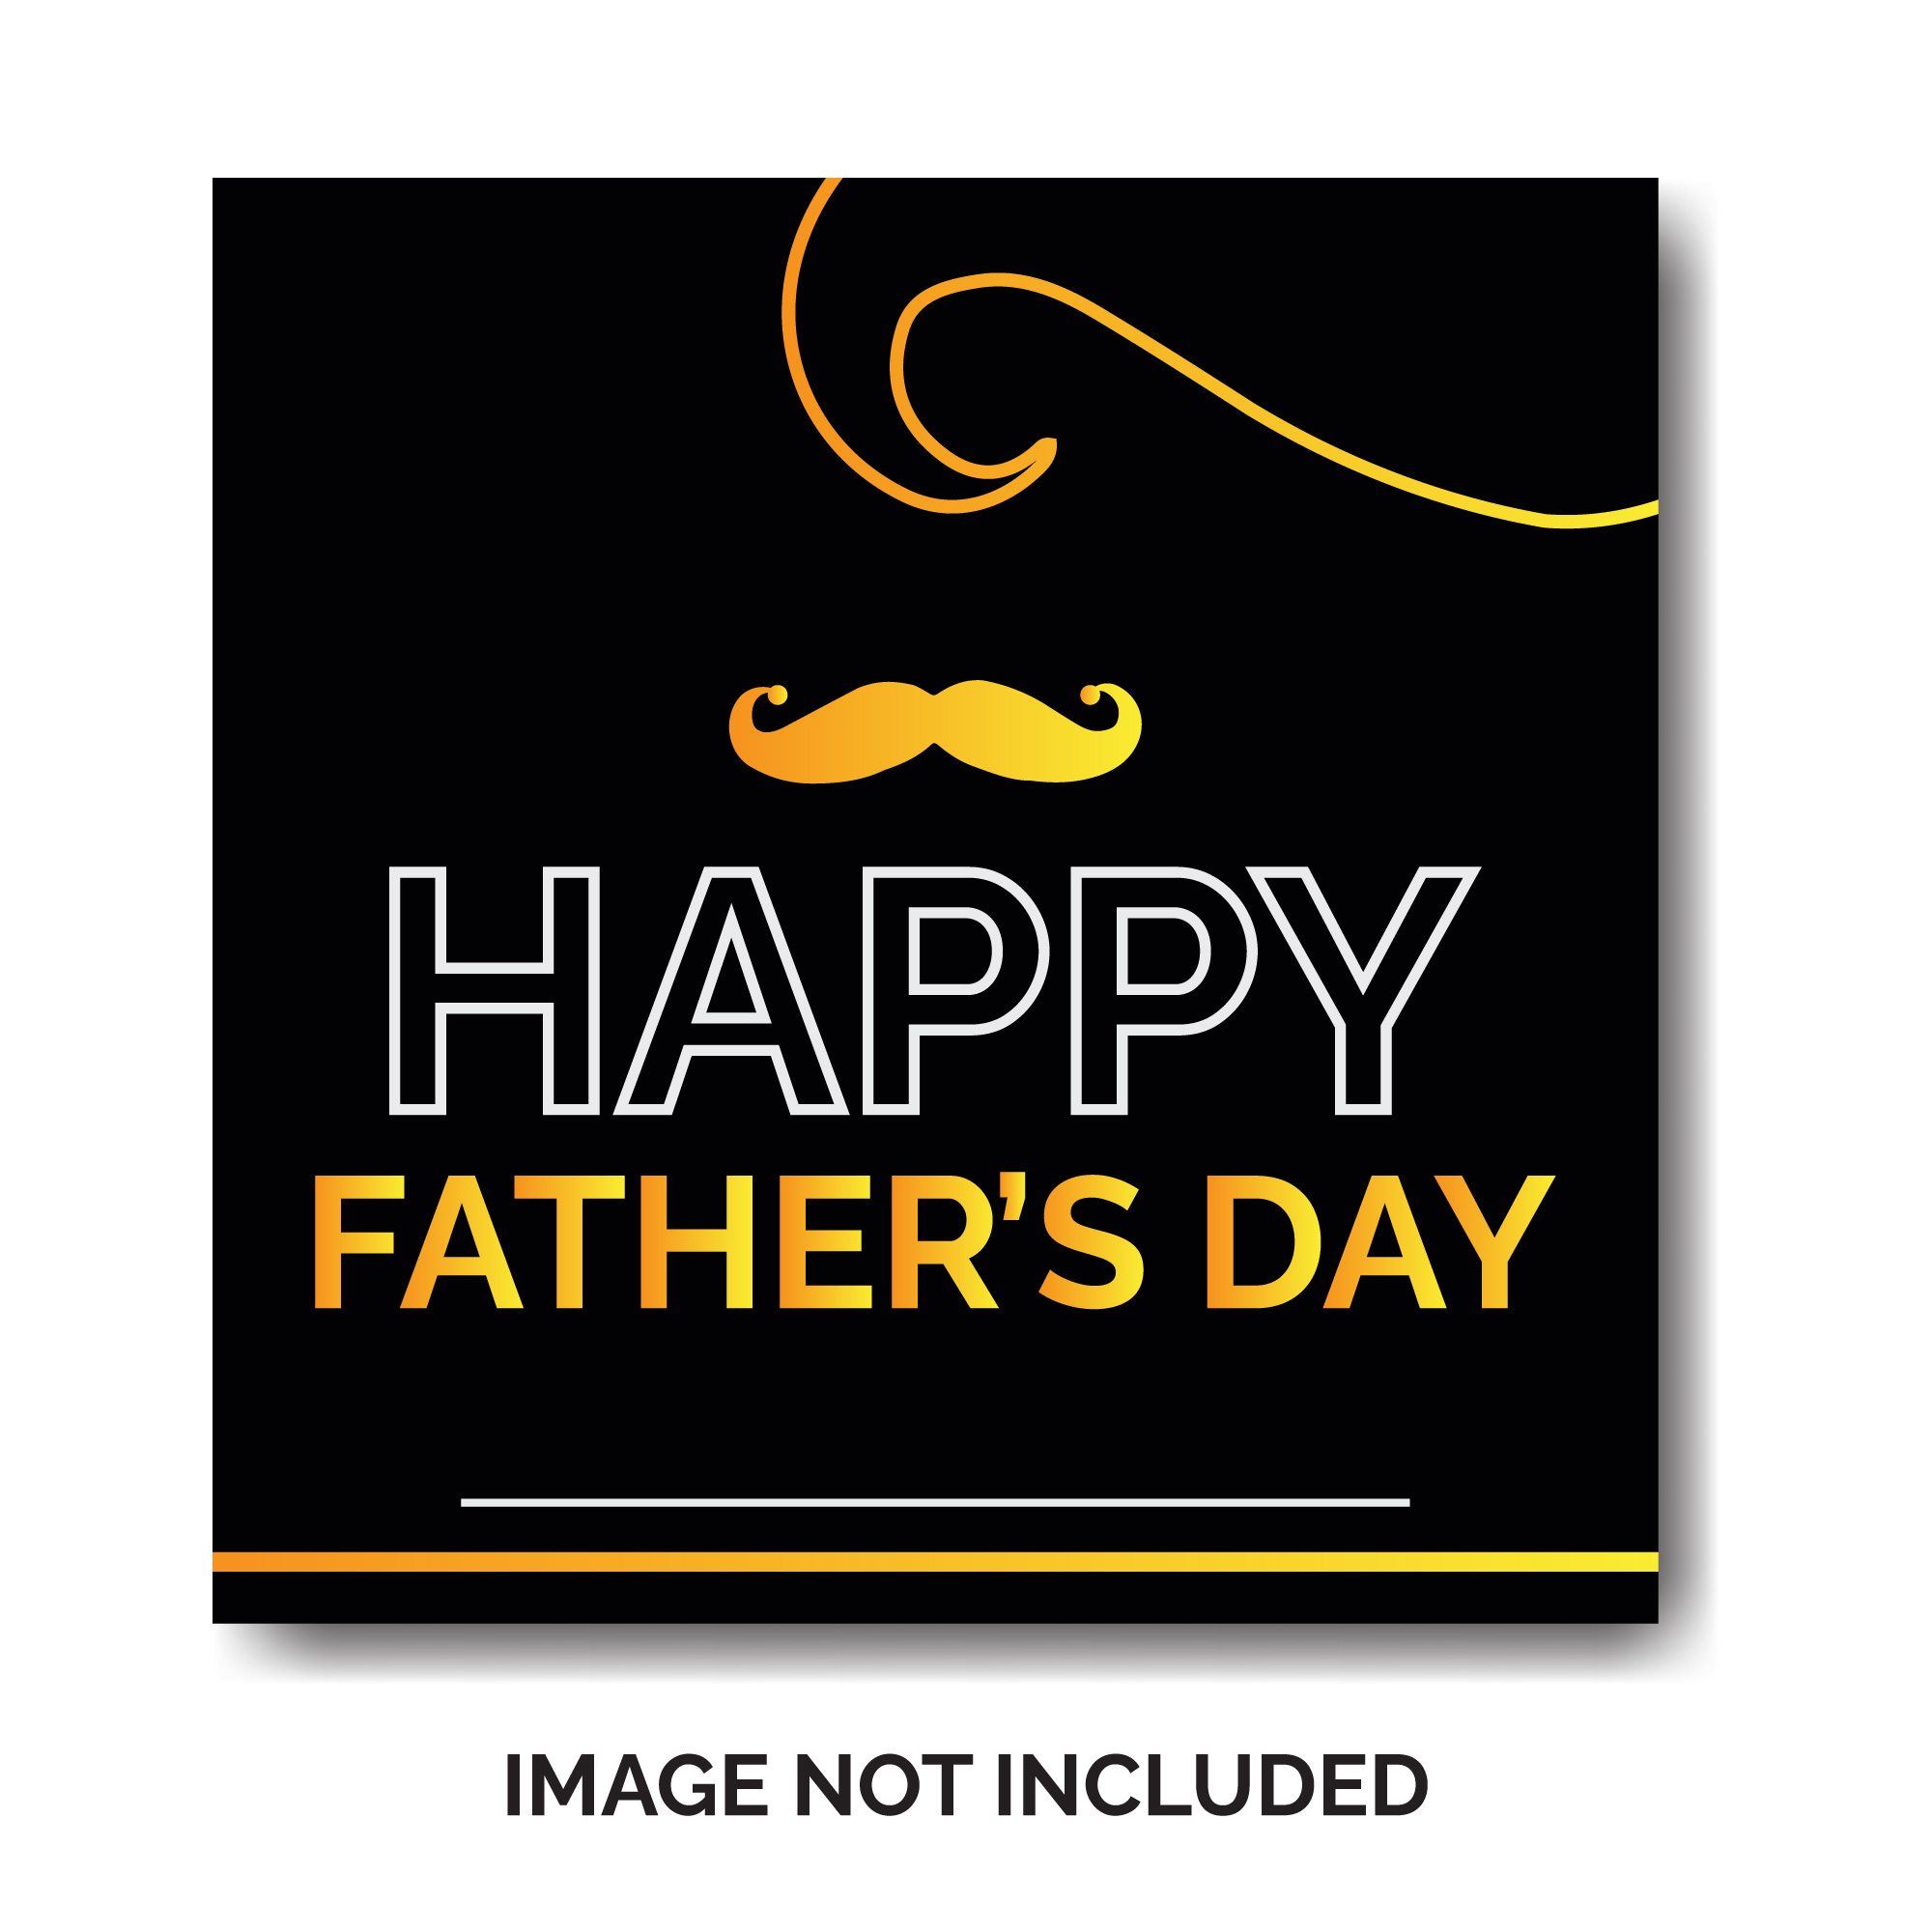 Father's Day social media template setFather's Day posters for greeting banners, ads, posters, flyers, social media, promotions, and sales pinterest preview image.